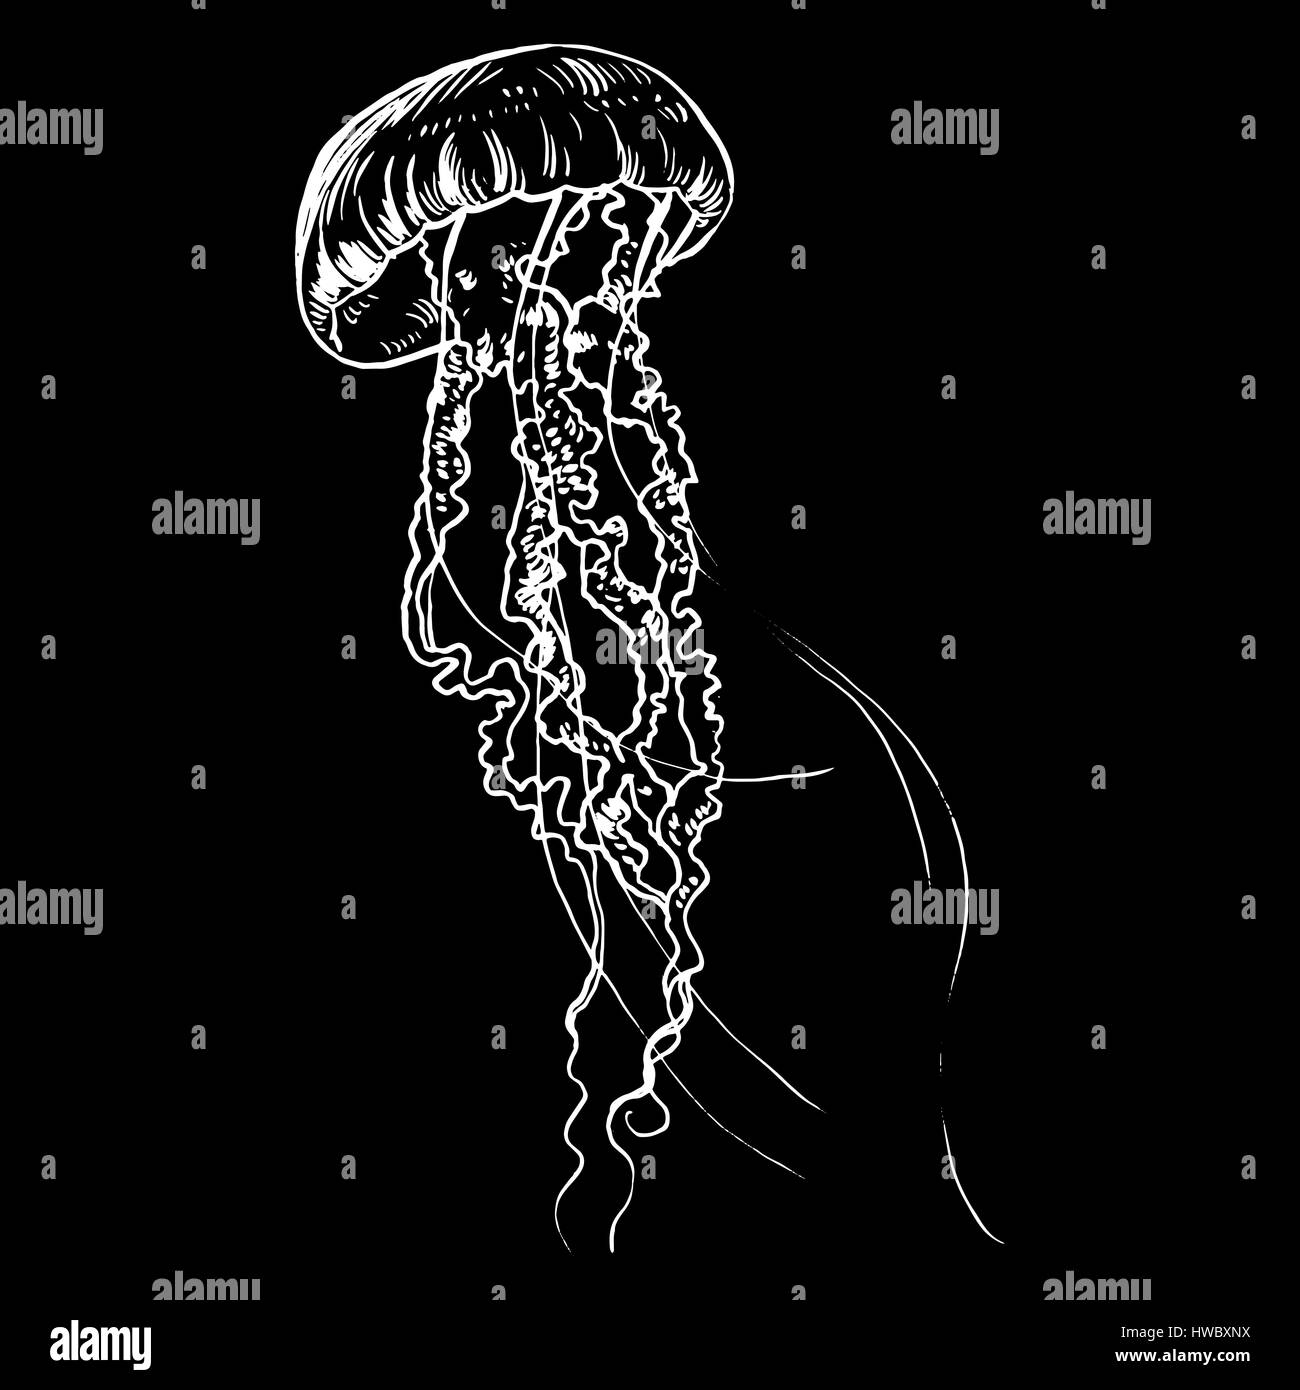 Vector Illustration Jellyfish Painted By Hand Stock Vector Image Art Alamy